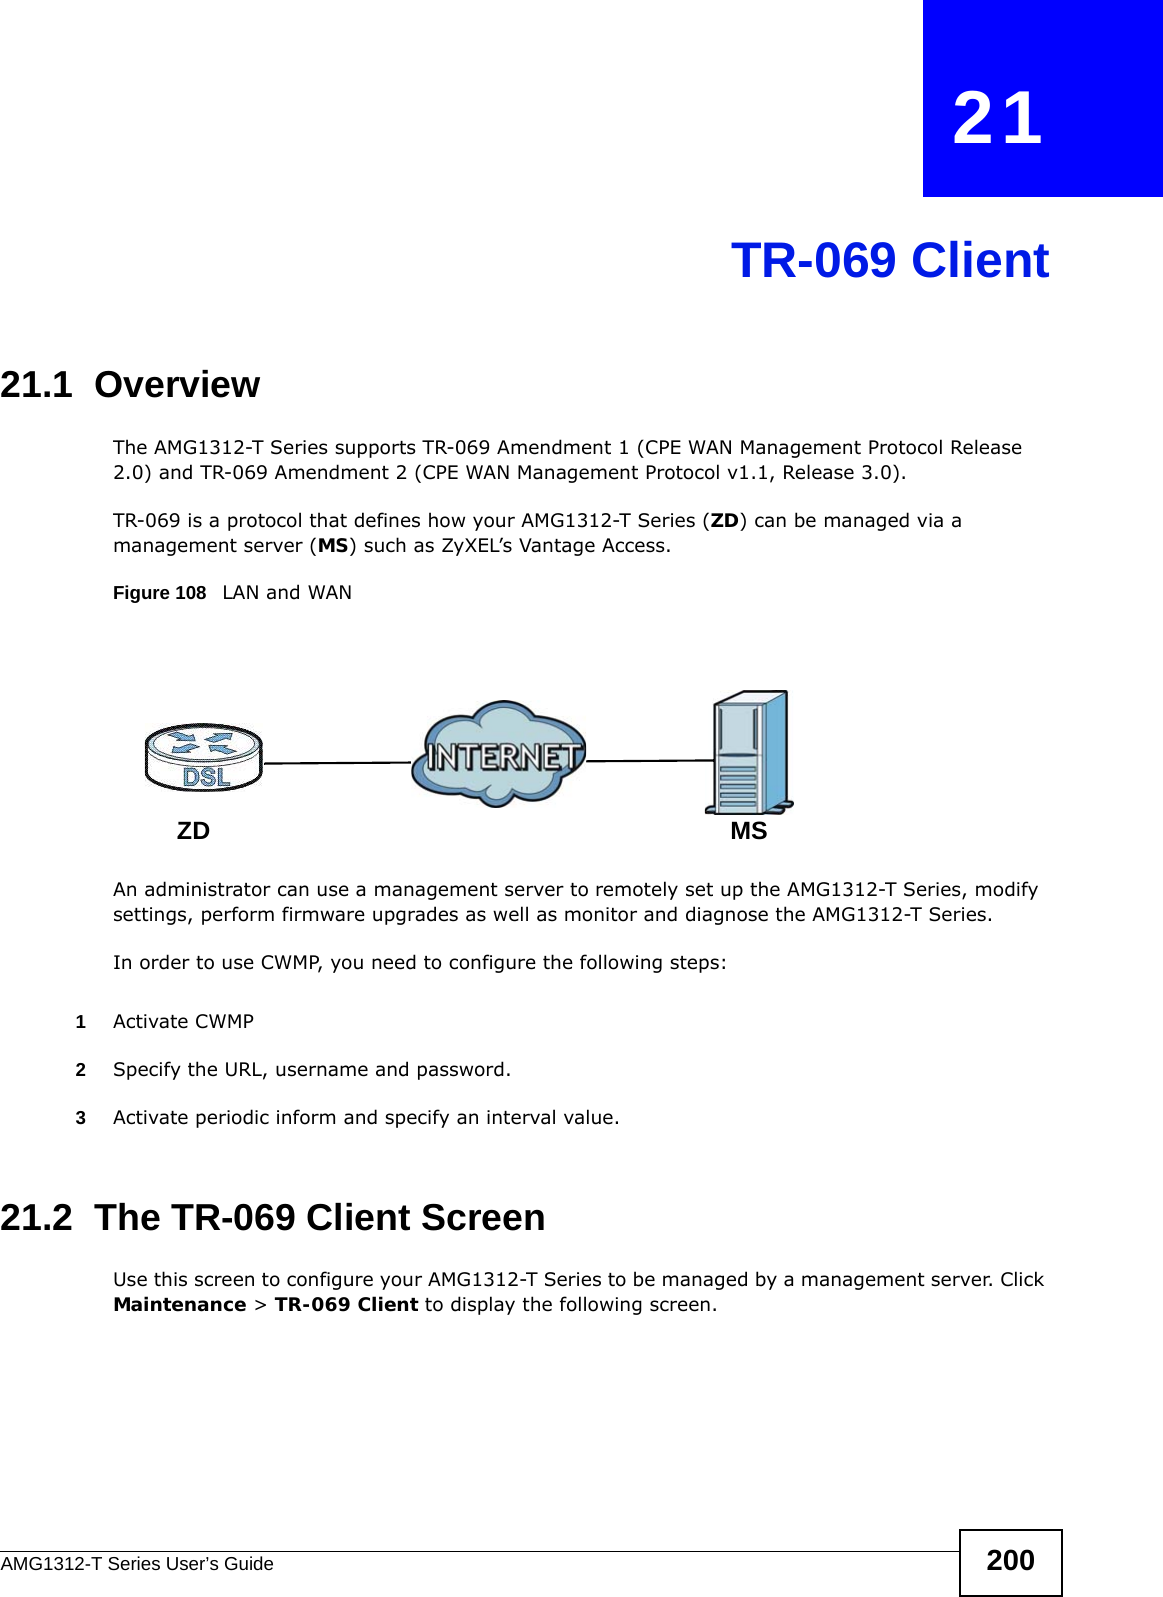 AMG1312-T Series User’s Guide 200CHAPTER   21TR-069 Client21.1  OverviewThe AMG1312-T Series supports TR-069 Amendment 1 (CPE WAN Management Protocol Release 2.0) and TR-069 Amendment 2 (CPE WAN Management Protocol v1.1, Release 3.0).TR-069 is a protocol that defines how your AMG1312-T Series (ZD) can be managed via a management server (MS) such as ZyXEL’s Vantage Access. Figure 108   LAN and WANAn administrator can use a management server to remotely set up the AMG1312-T Series, modify settings, perform firmware upgrades as well as monitor and diagnose the AMG1312-T Series. In order to use CWMP, you need to configure the following steps:1Activate CWMP2Specify the URL, username and password.3Activate periodic inform and specify an interval value.21.2  The TR-069 Client ScreenUse this screen to configure your AMG1312-T Series to be managed by a management server. Click Maintenance &gt; TR-069 Client to display the following screen.MSZD